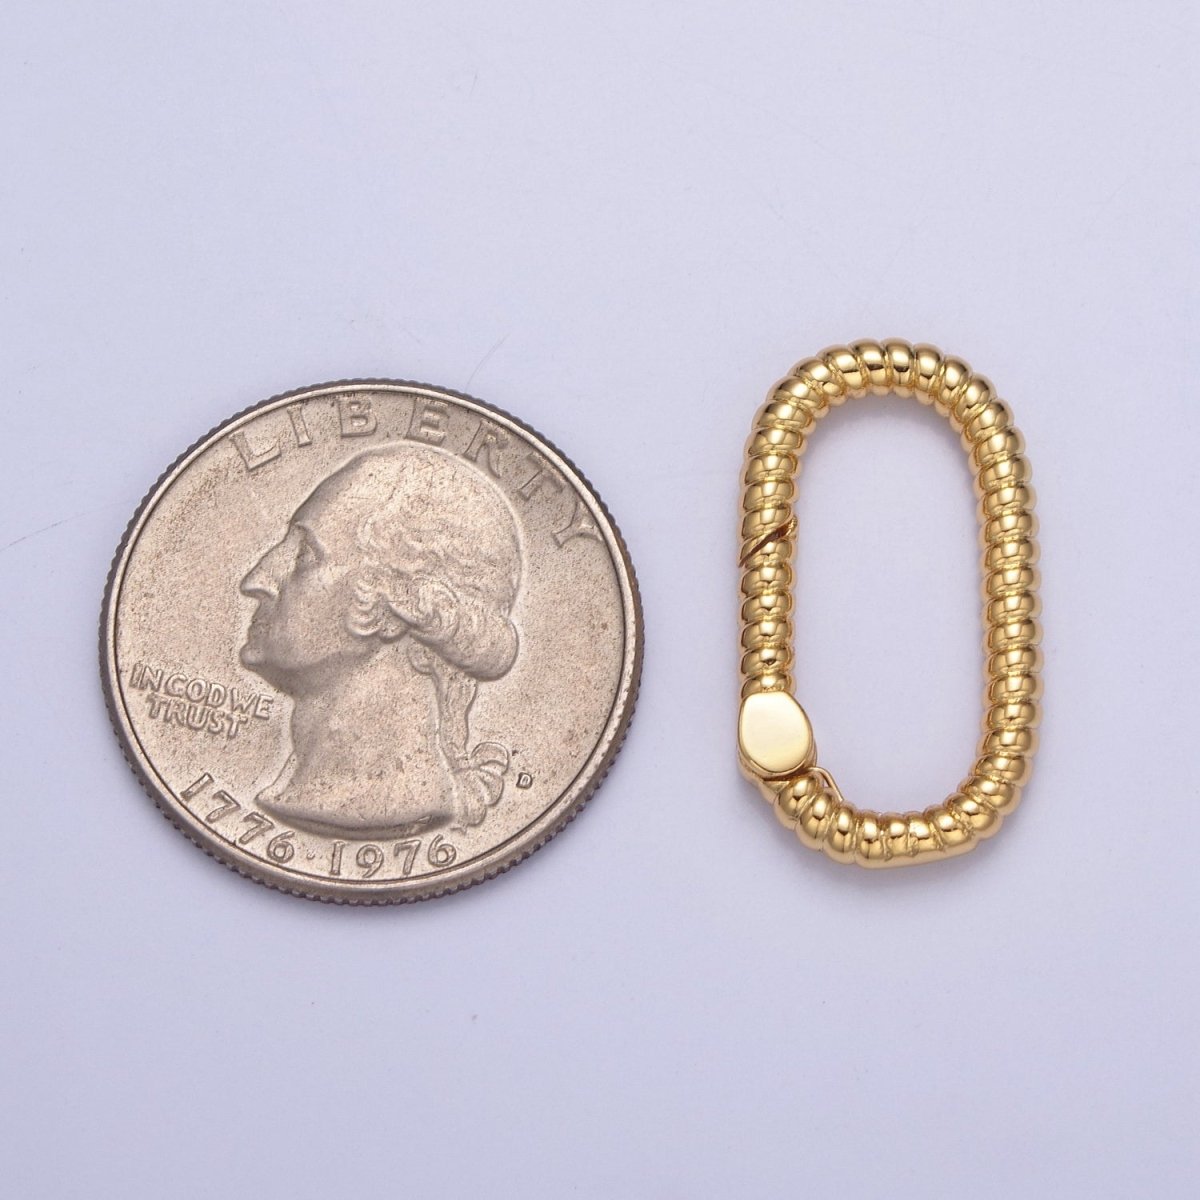 Dainty Gold Oval Spring Gate Ring, Push Gate Clasp Charm Holder 14K Gold Filled Clasp for Charm Holder Connector L-727 L-728 - DLUXCA